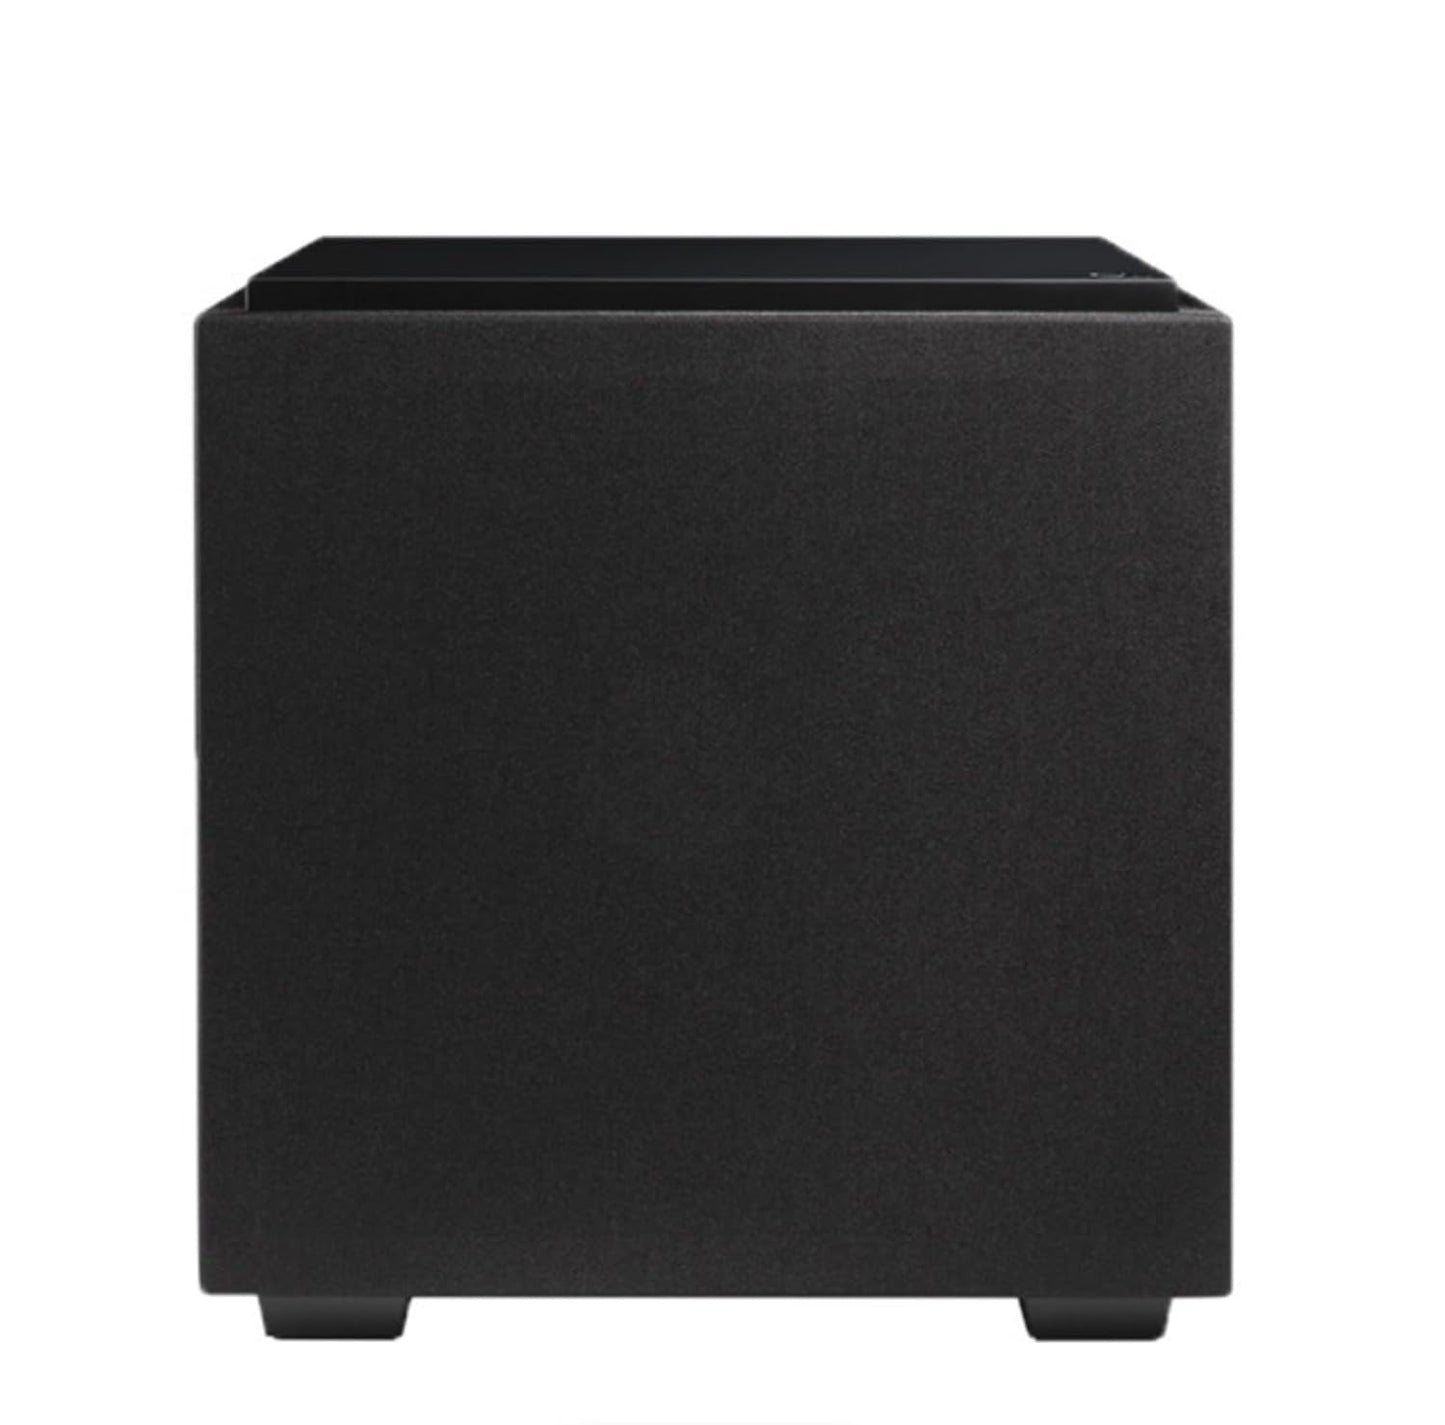 Definitive Technology DN12 Ultra Performance 12 Inches Subwoofer